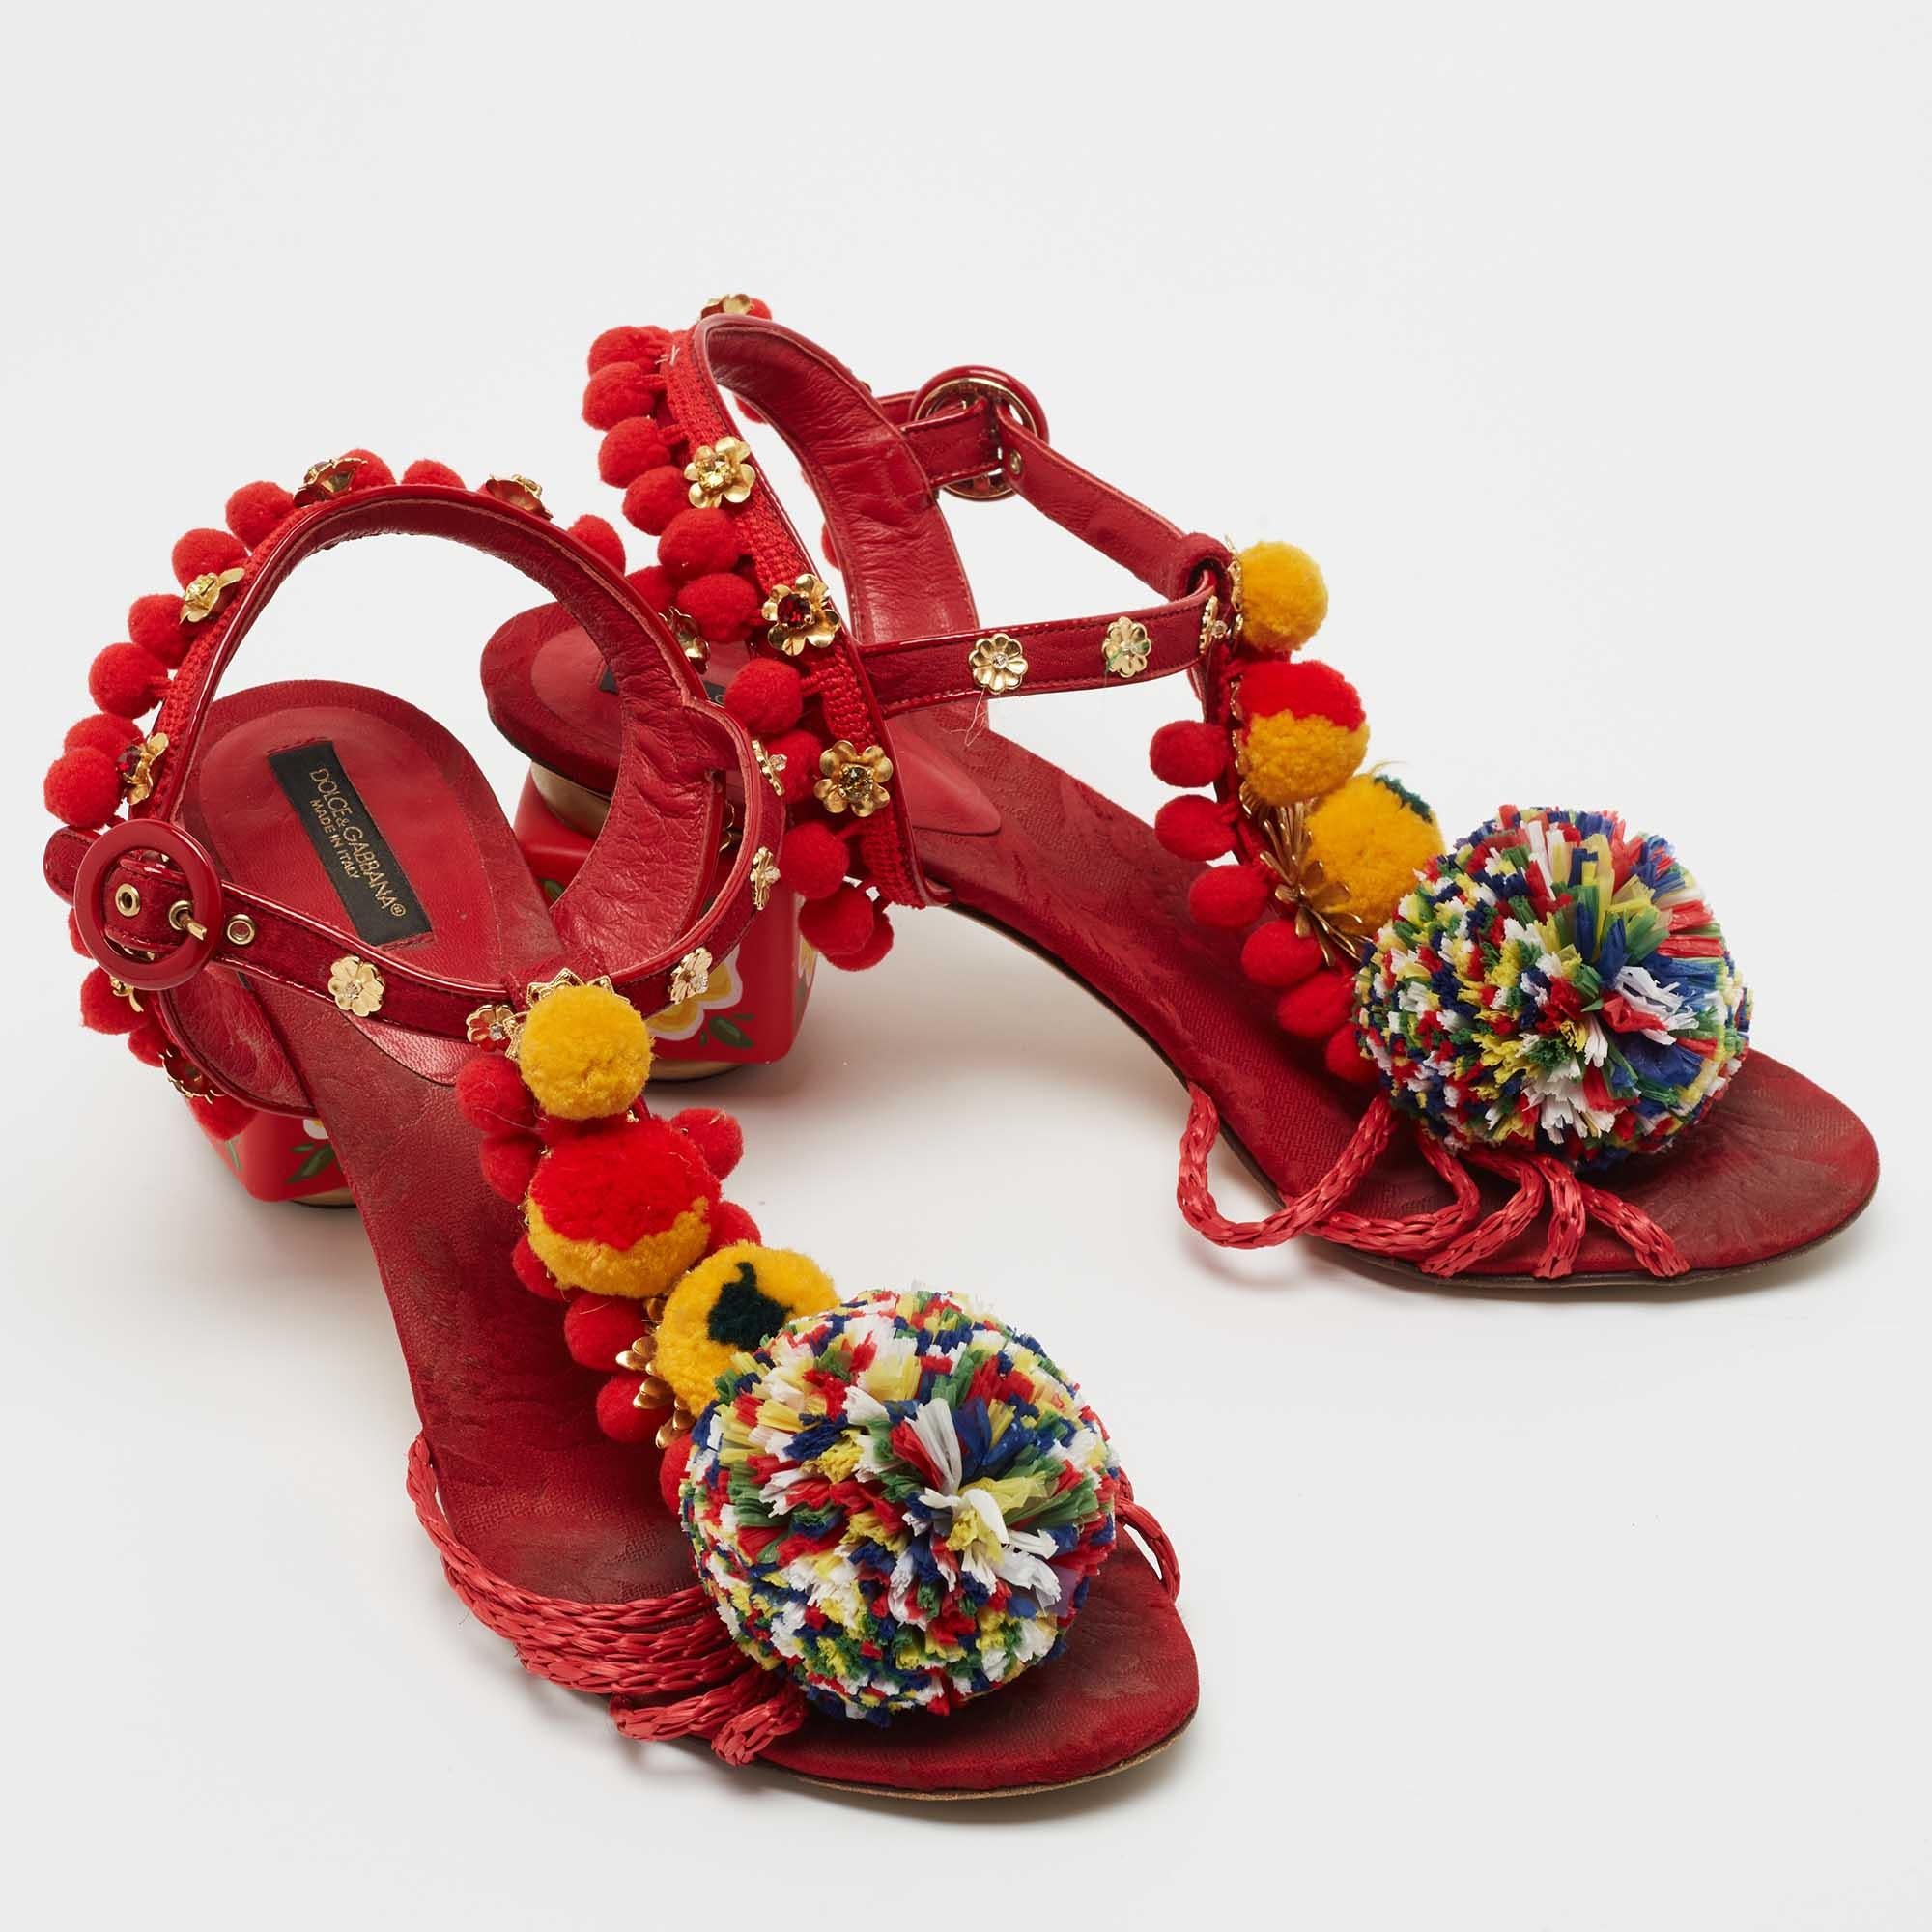 Dolce & Gabbana Multicolor Leather and Fabric Pom Pom Sandals Size 39 2